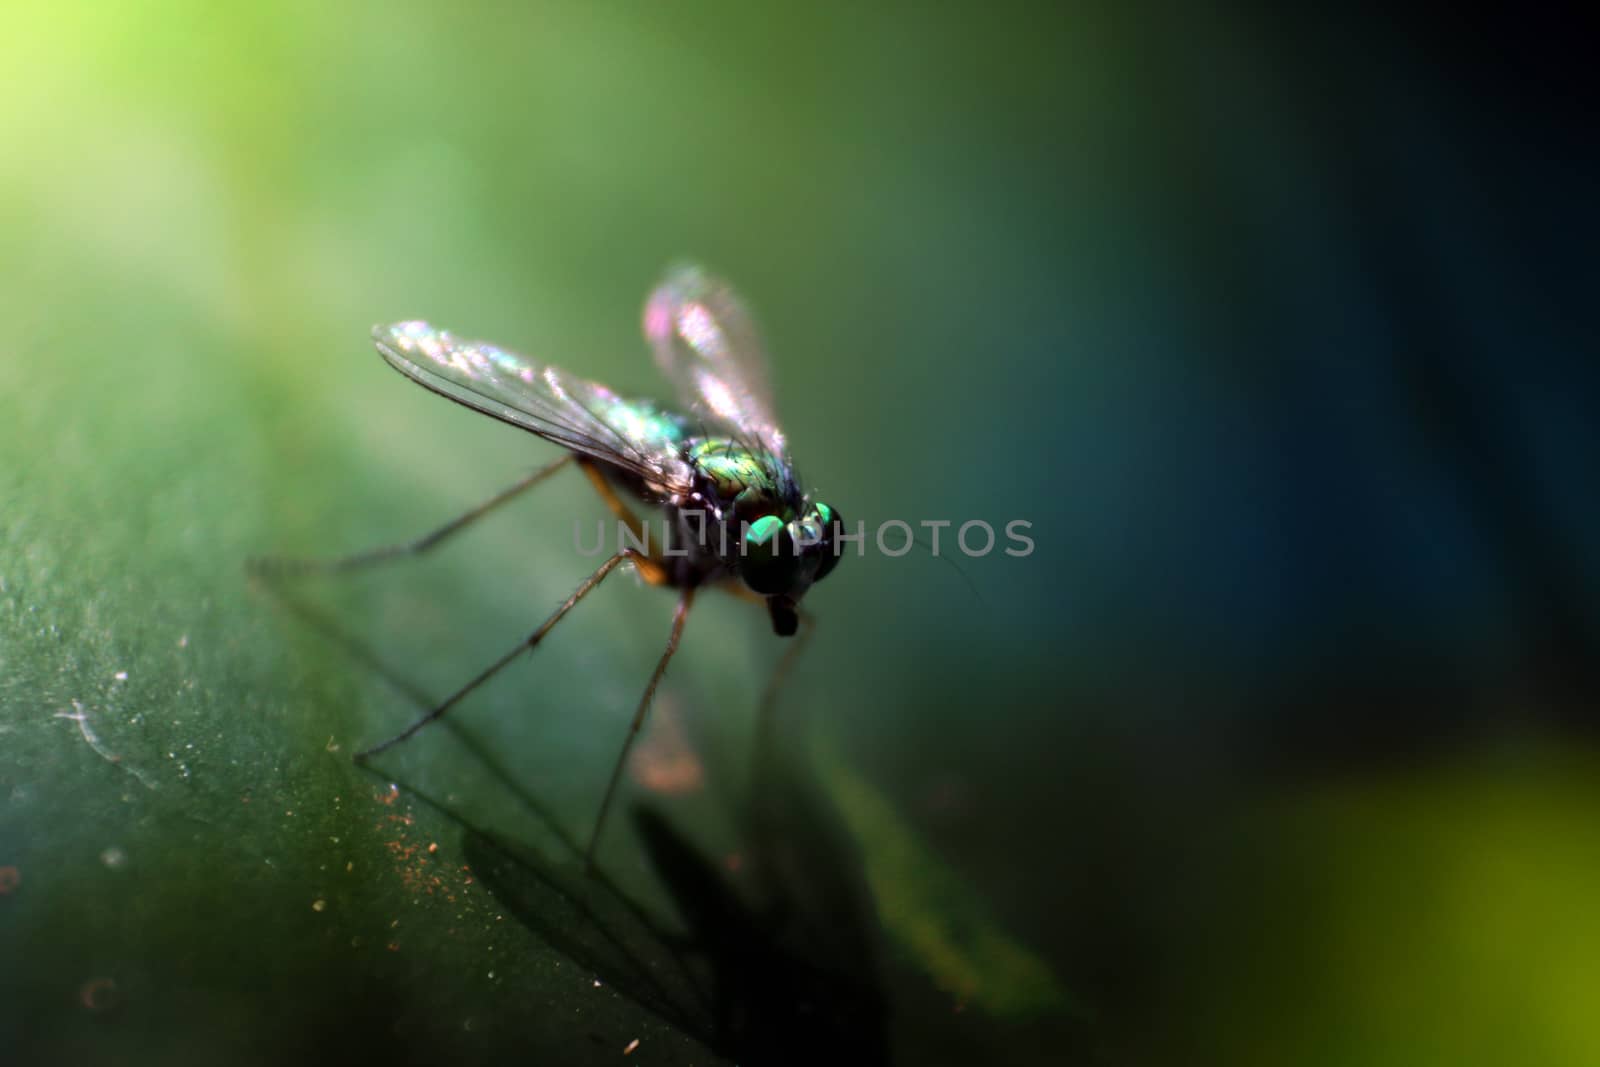 A macro shot of a fly with shiny colors of blue and green.